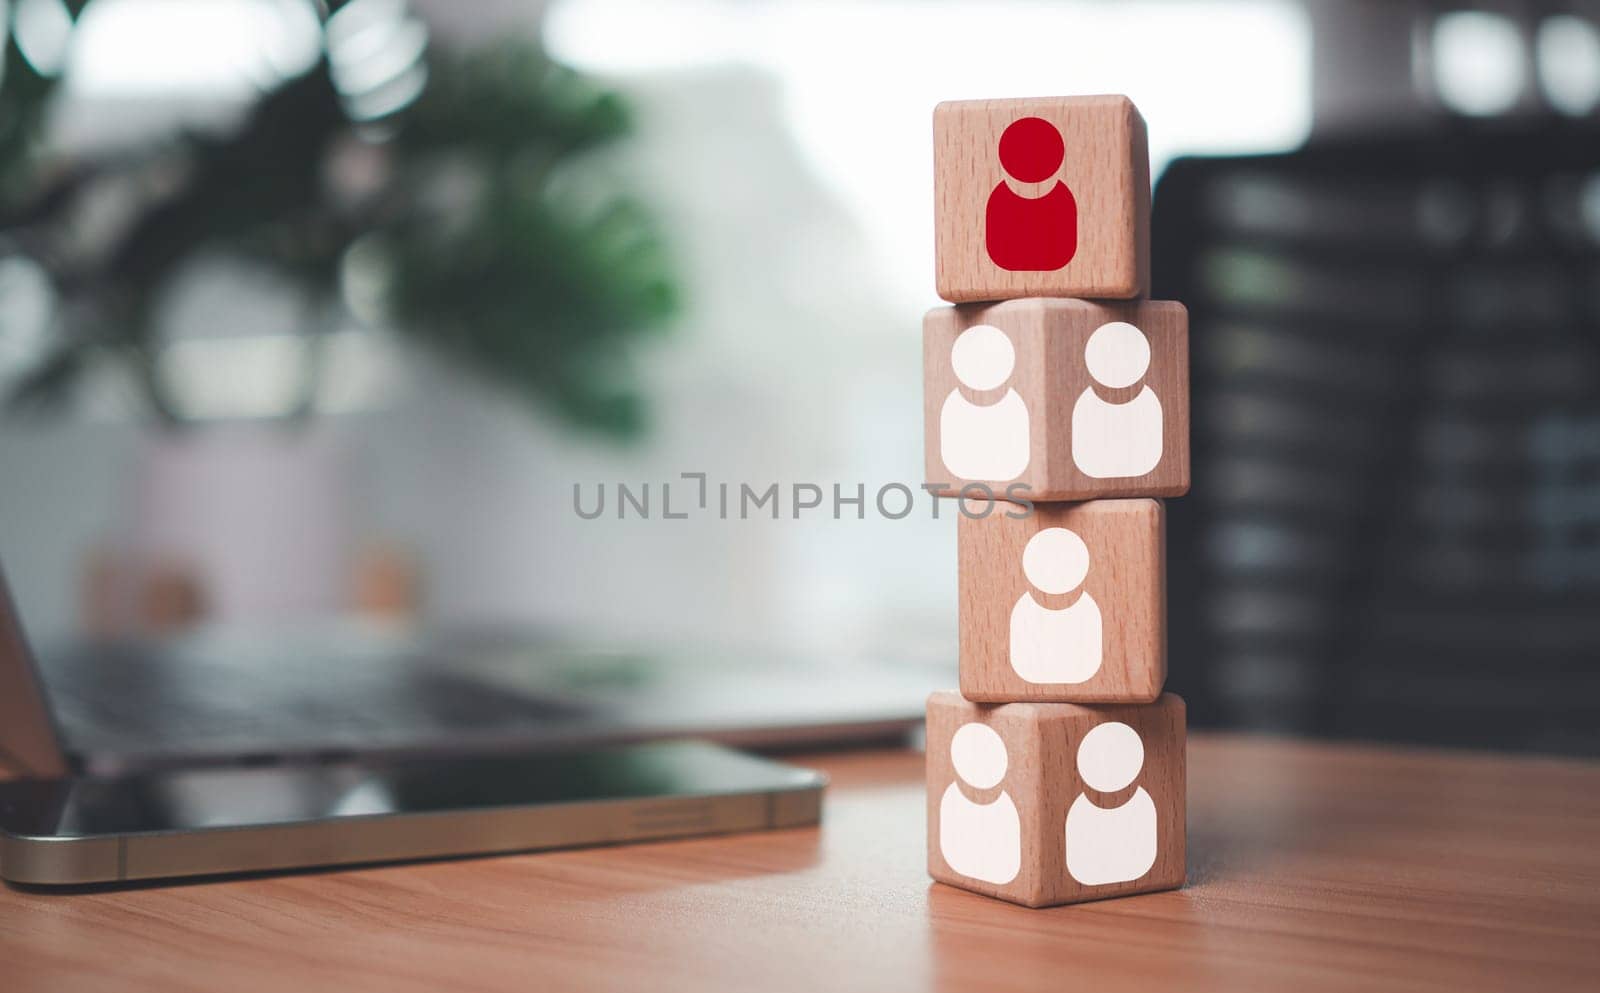 One wooden block has leadership and stands out with red manager icon placed on table as human resource management concept for leadership and teamwork.